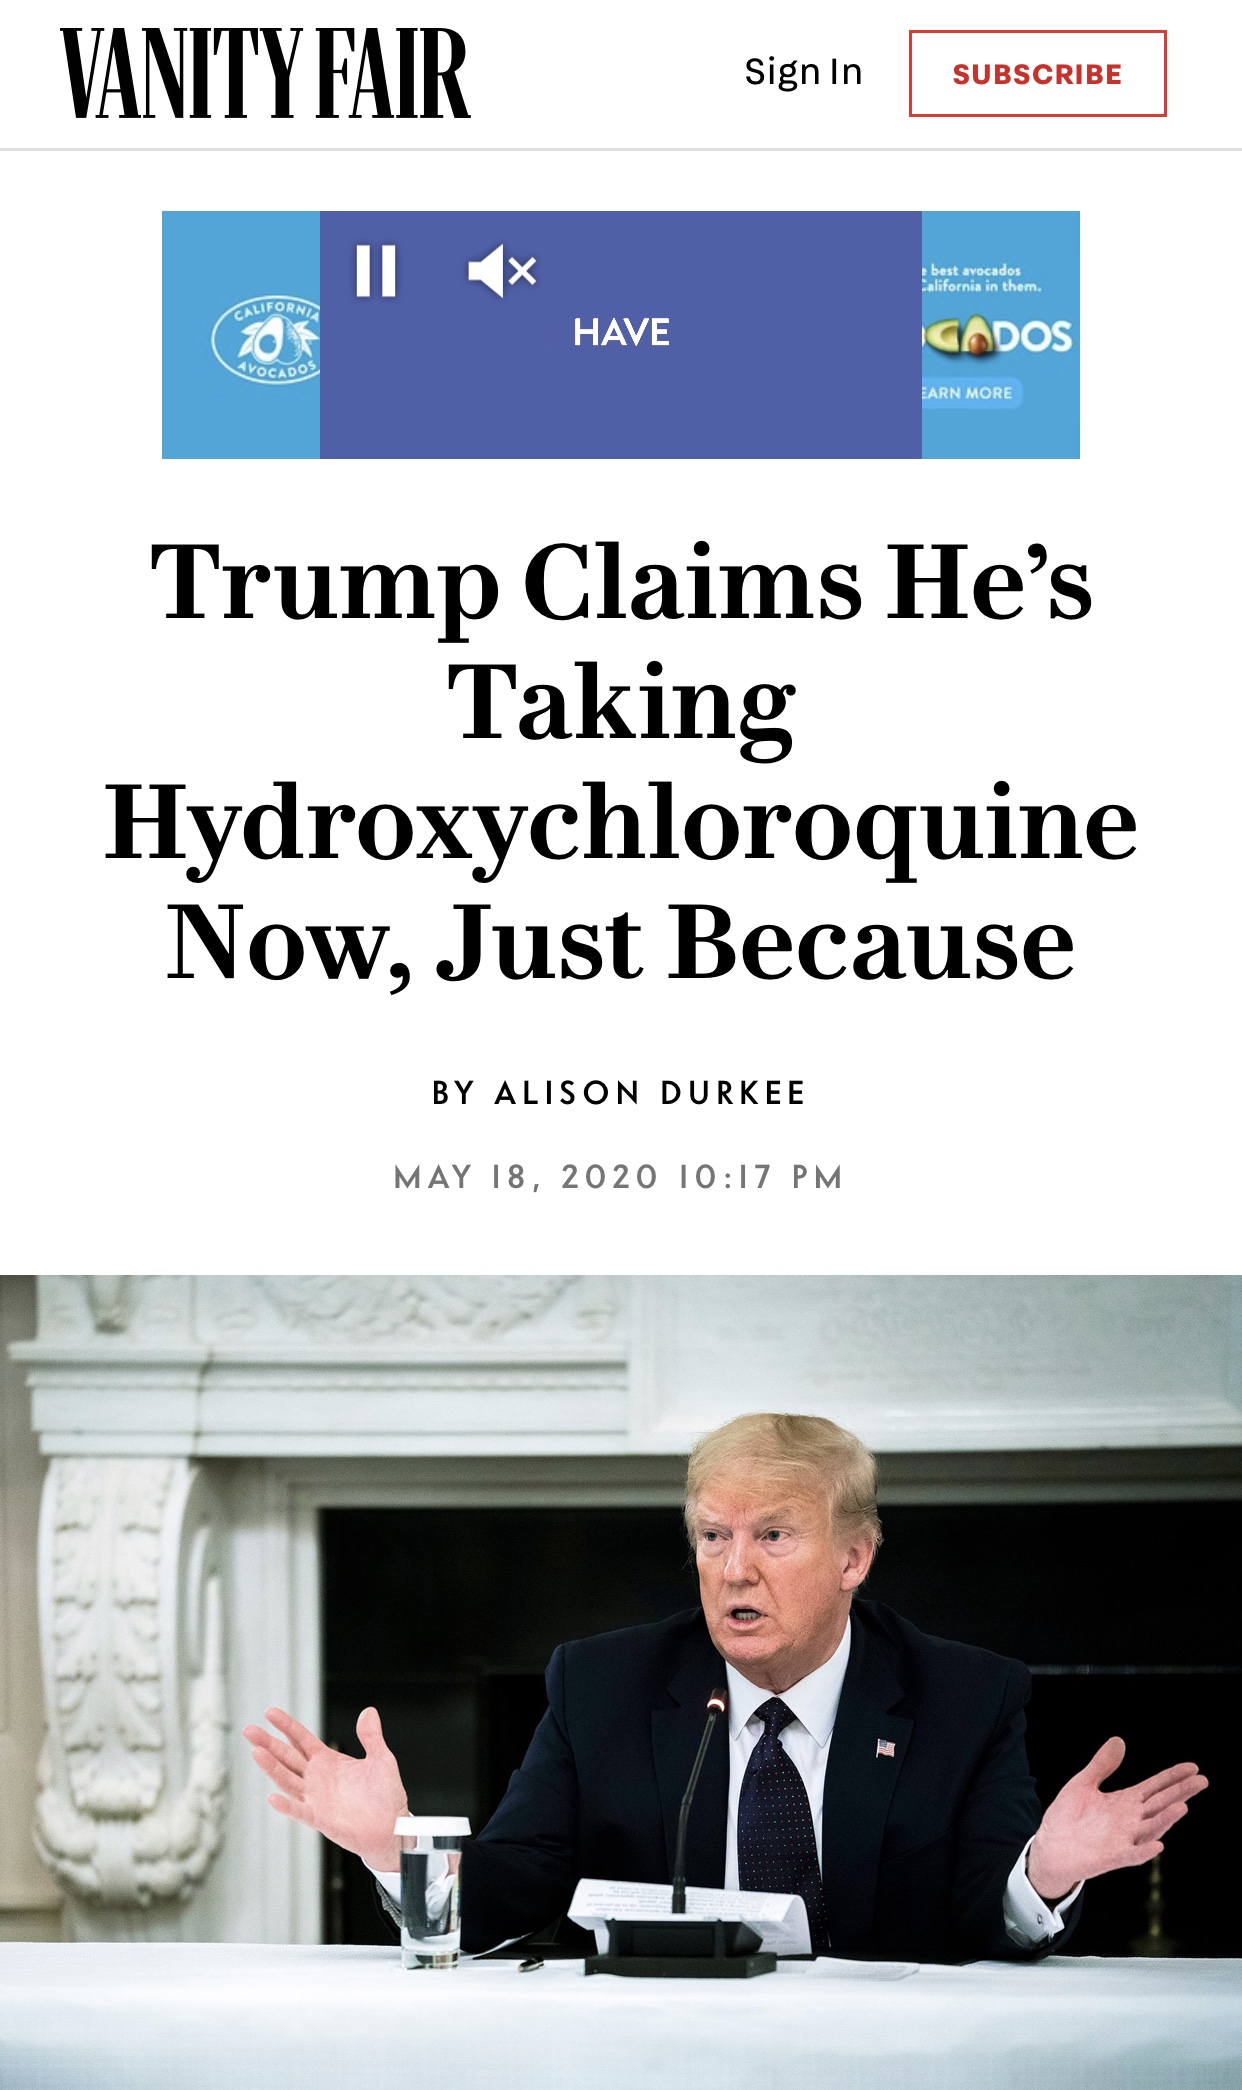 President Trump shared with the American Public he is taking Hydroxychloroquine